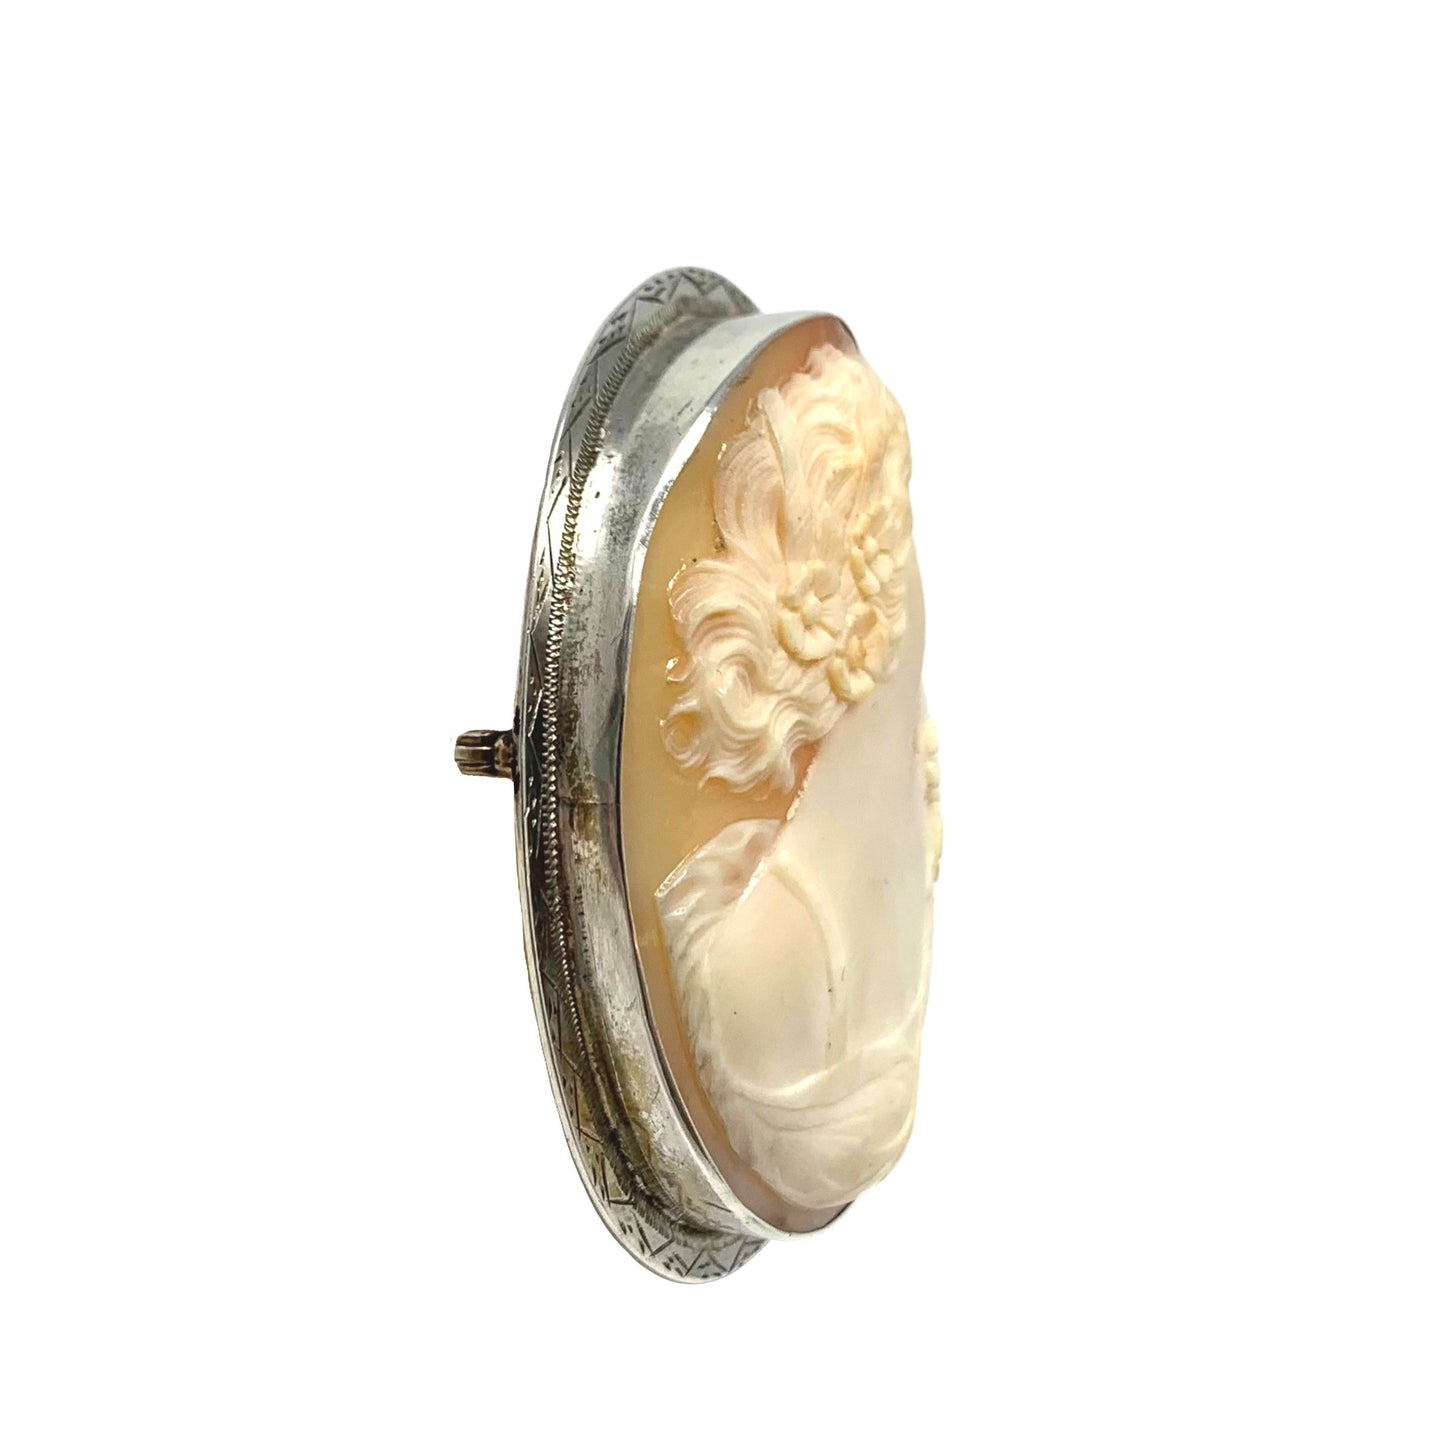 Victorian Sterling Large Cameo Brooch